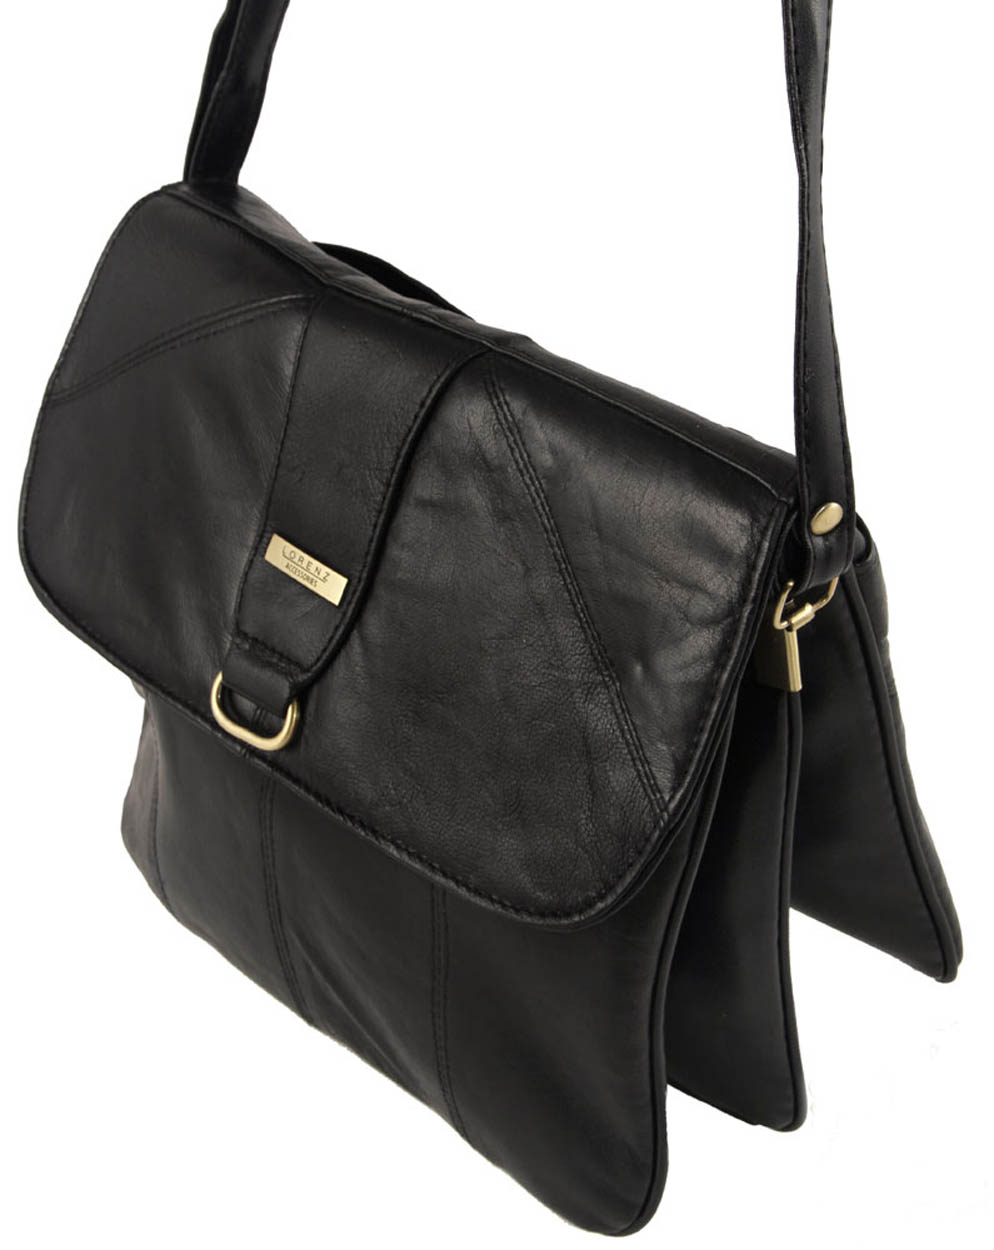 soft leather handbags with compartments